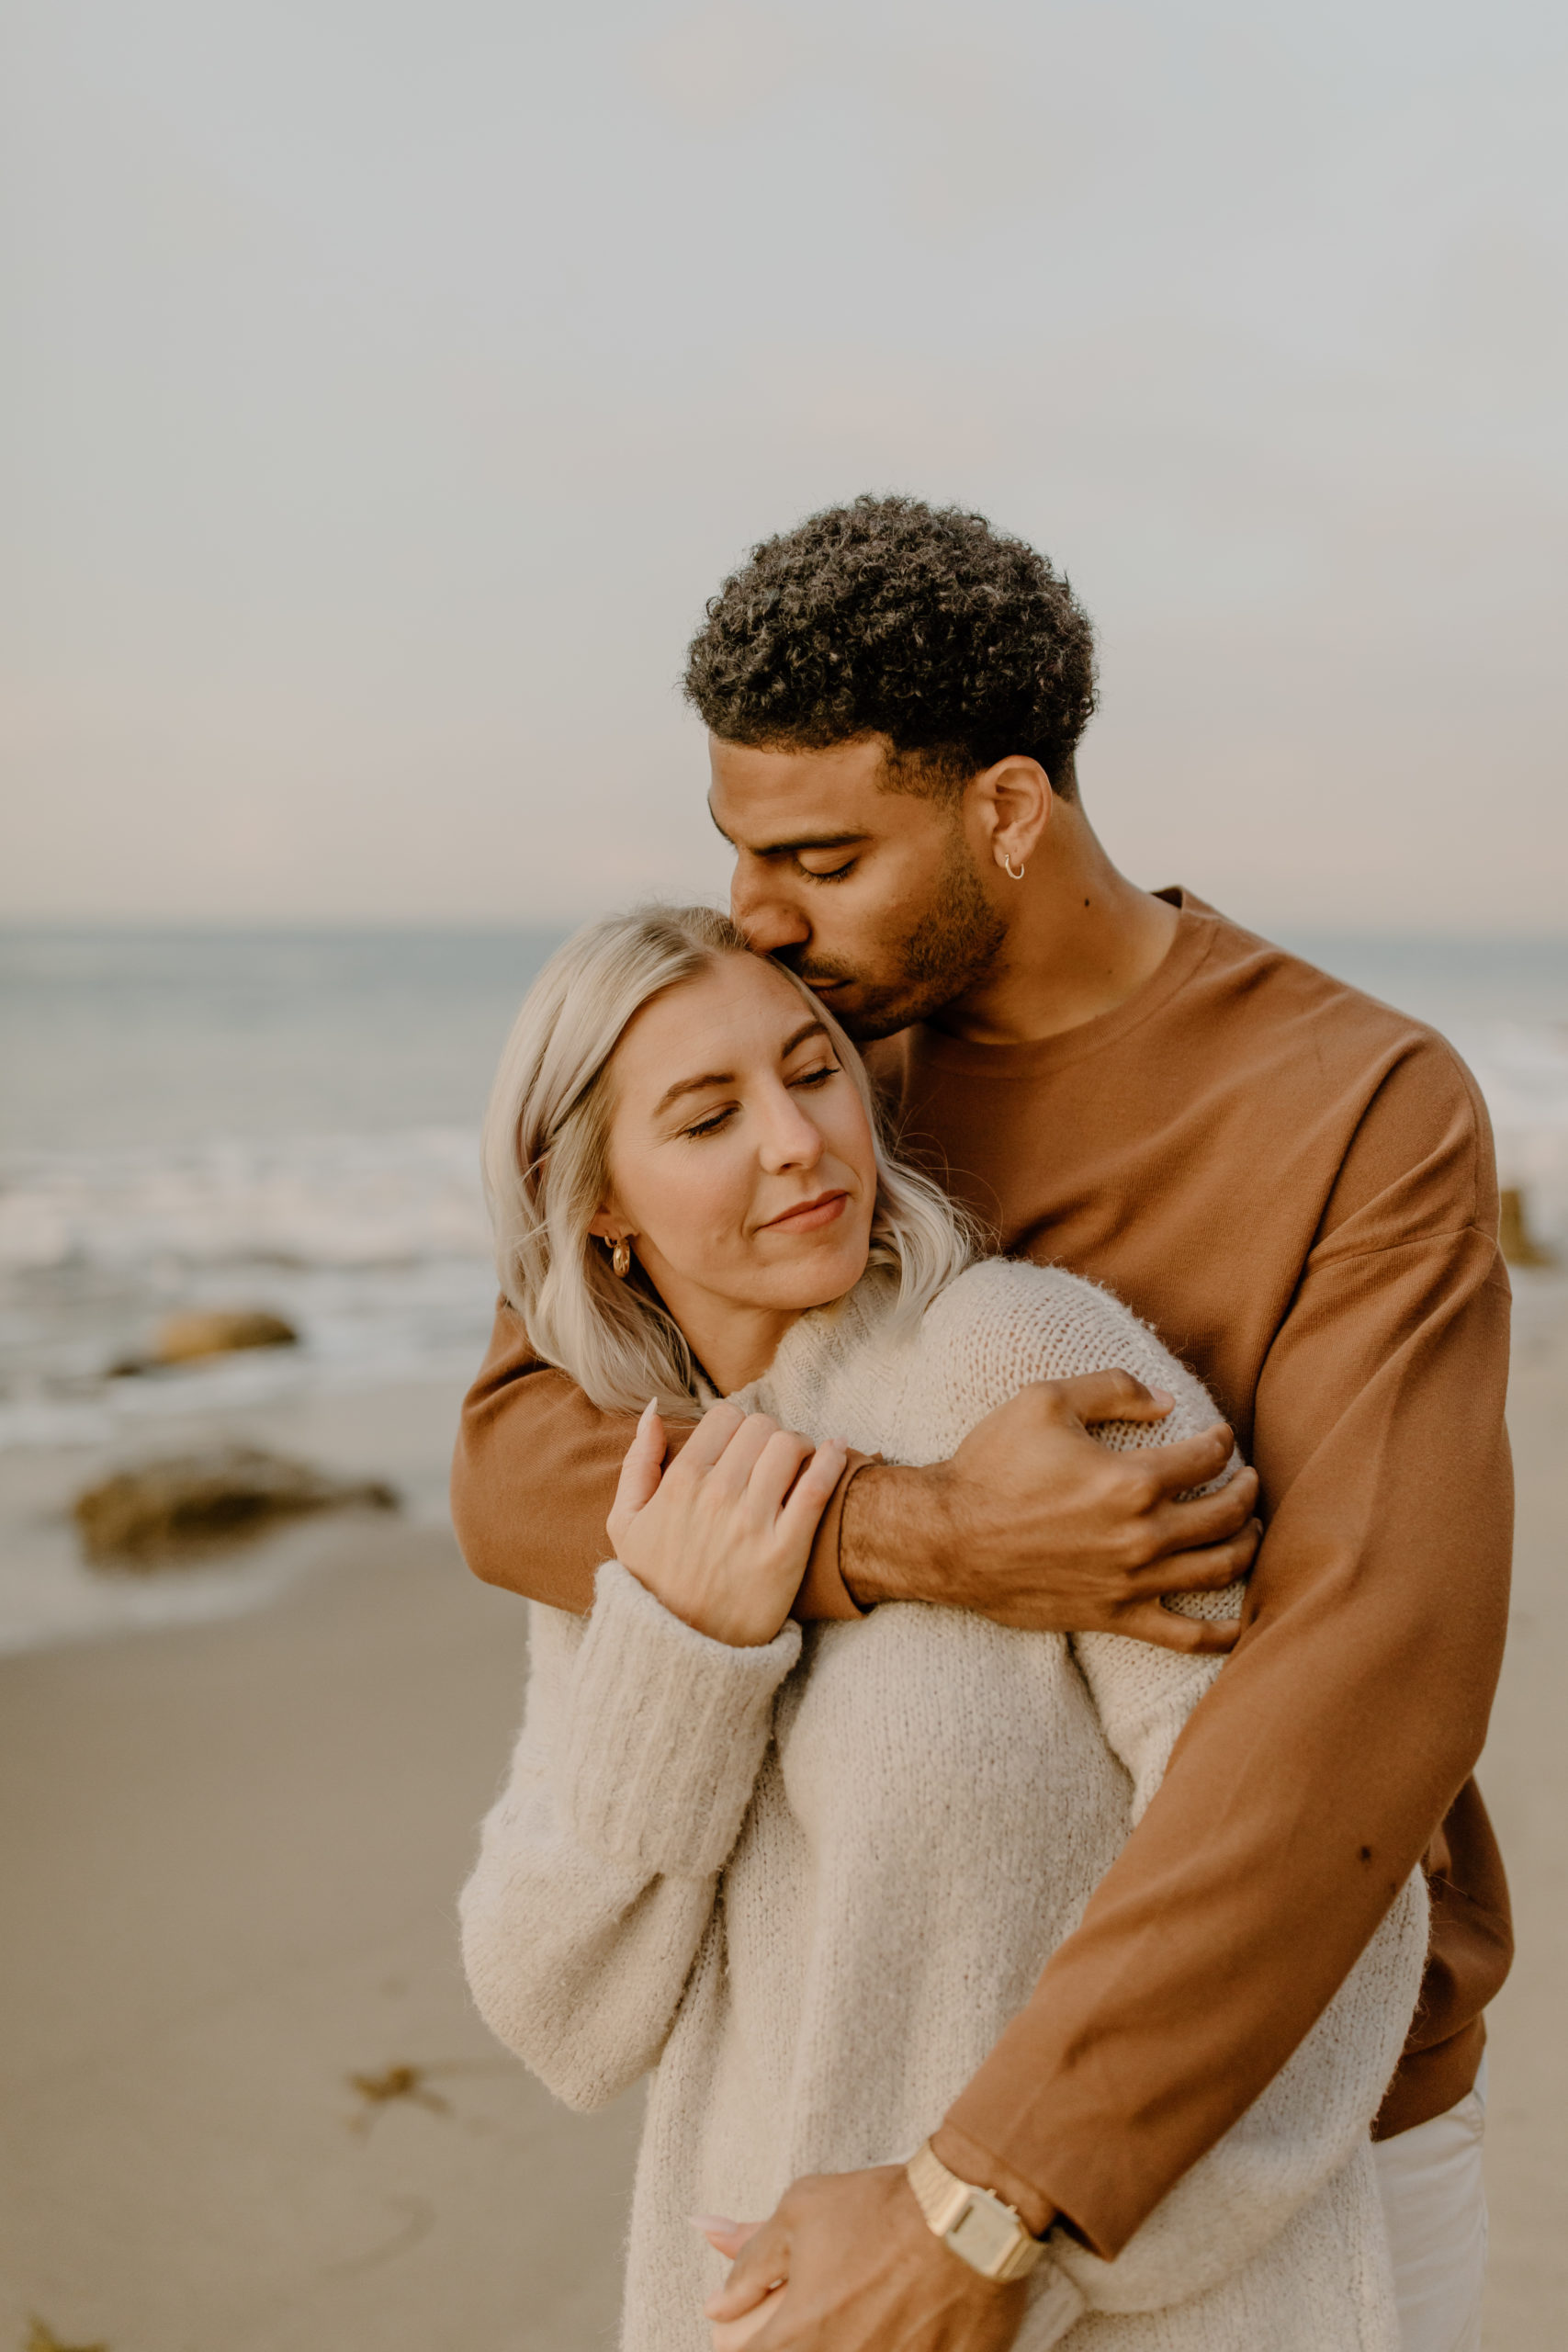 couple hugging on beach in California for engagement photoshoot